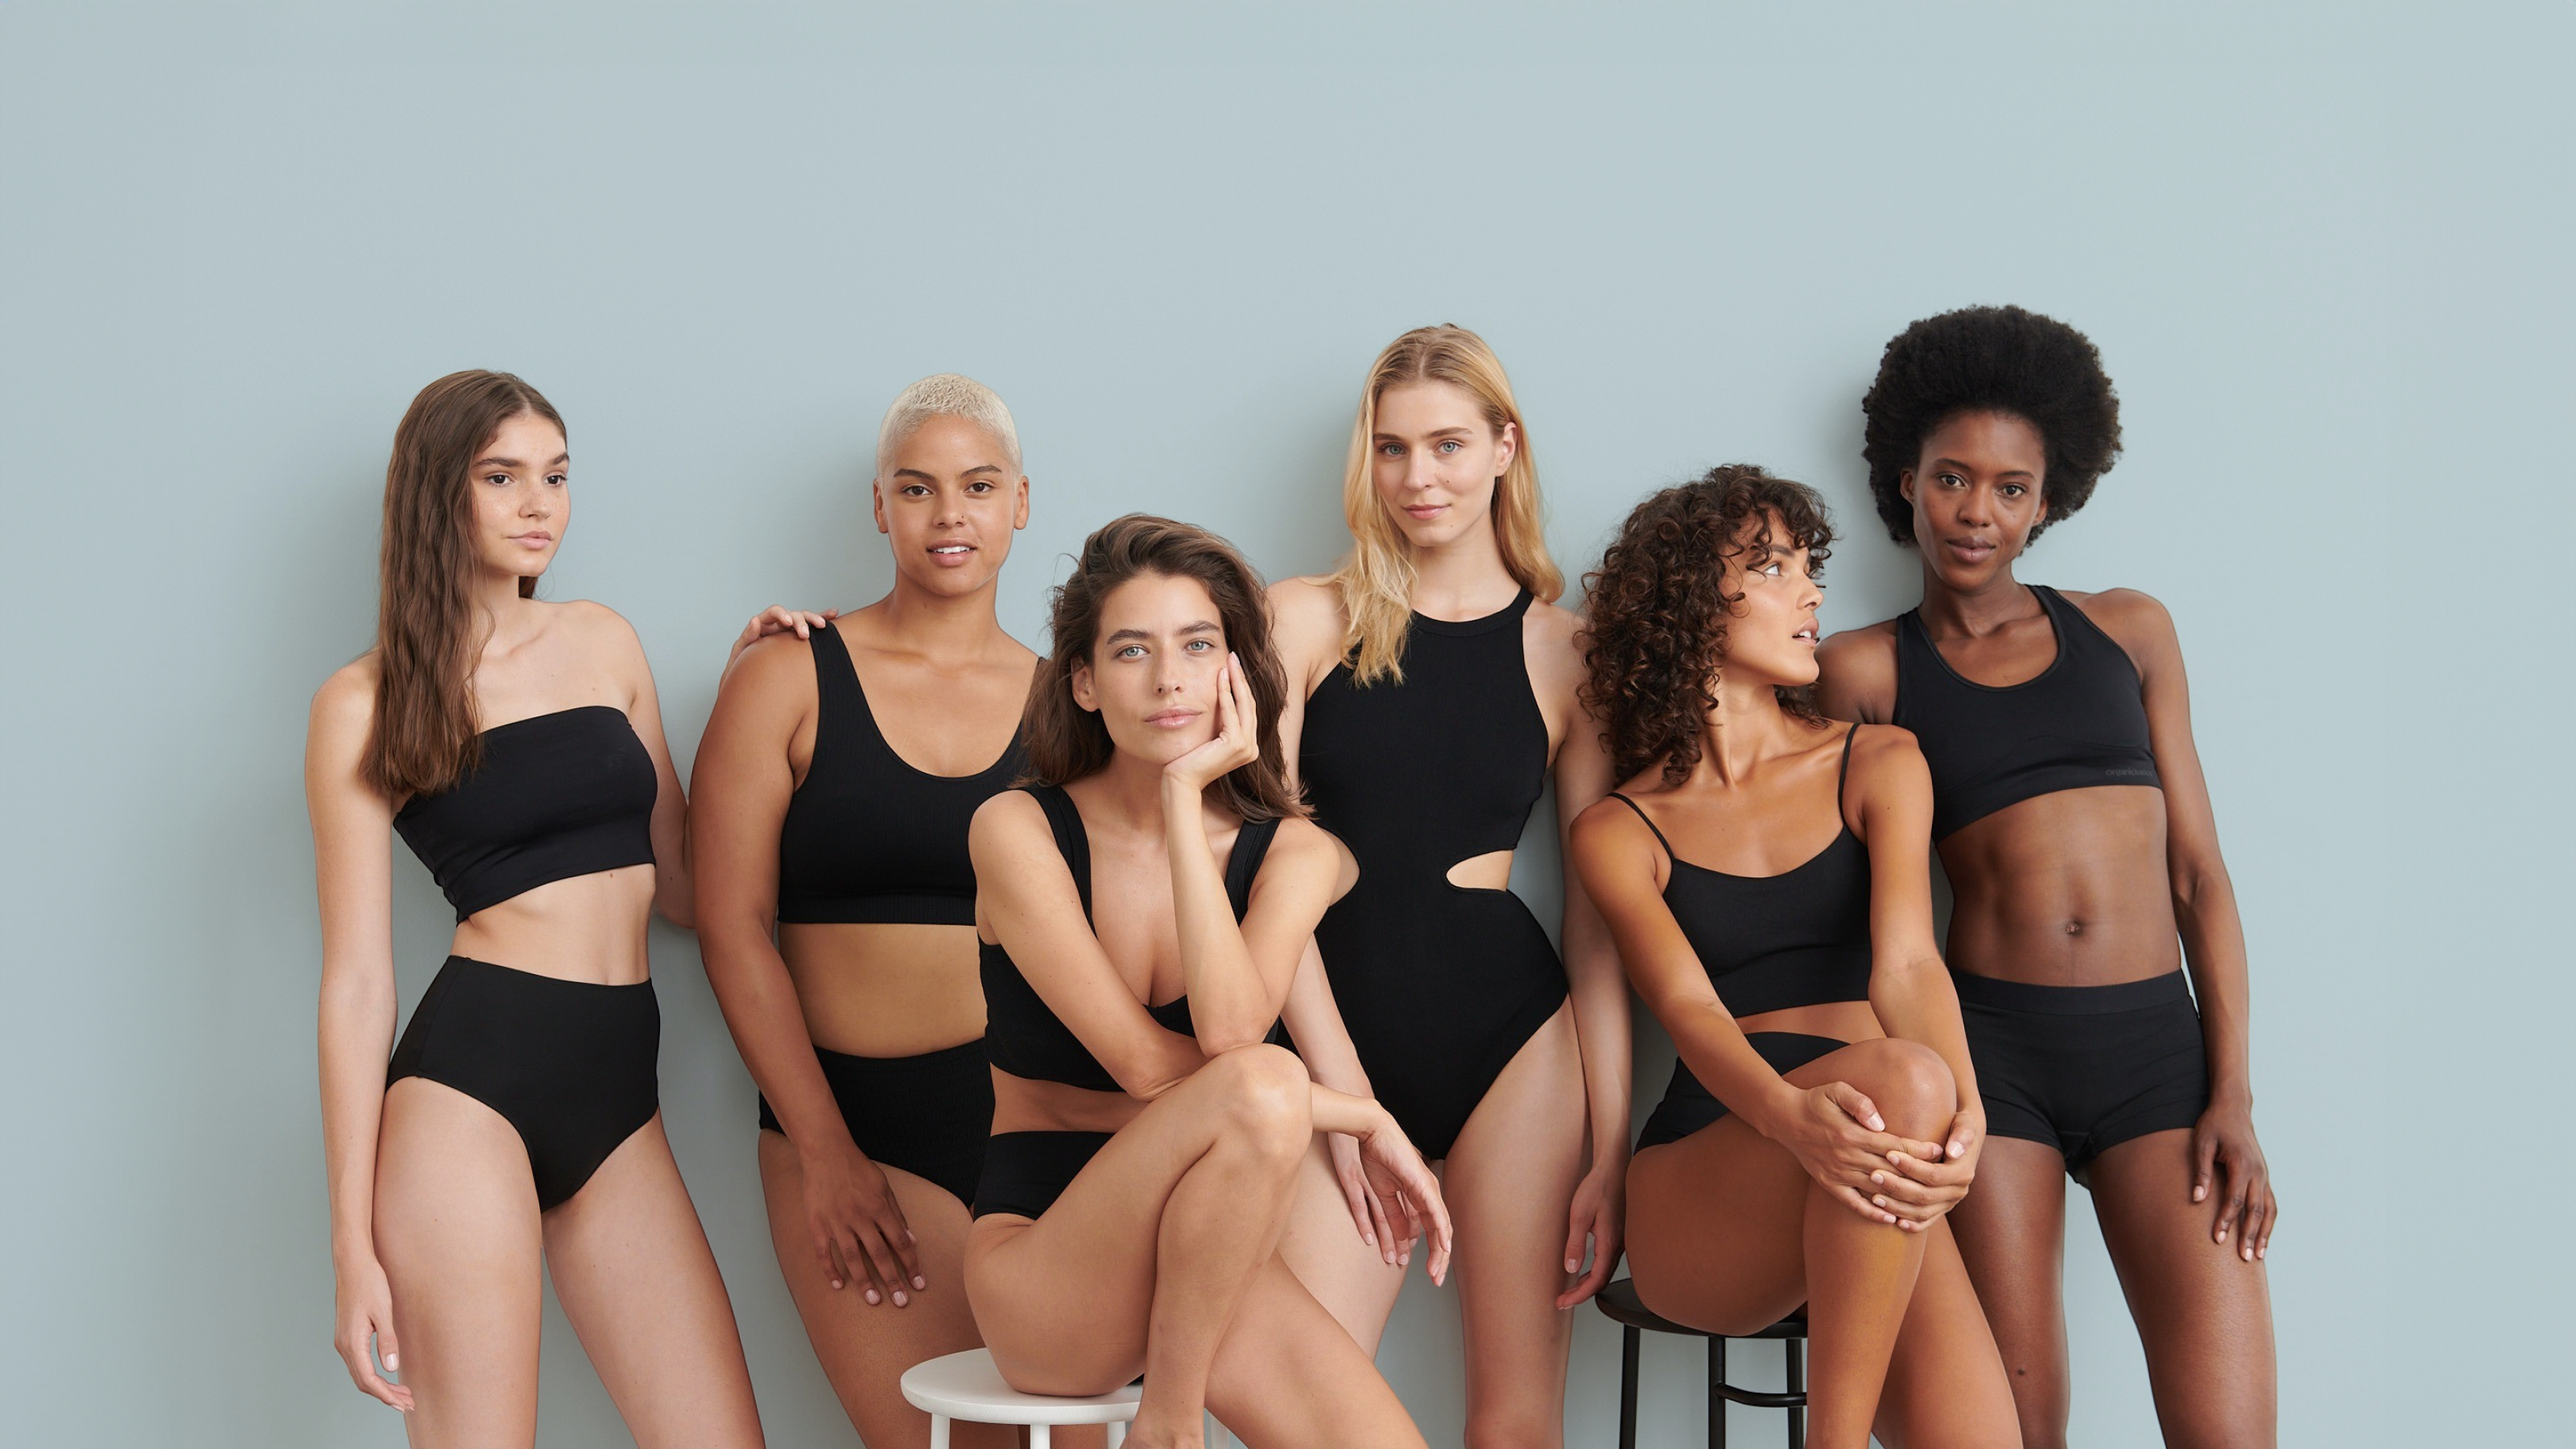 Group of 6 women in black sporty bikinis sitting and standing.